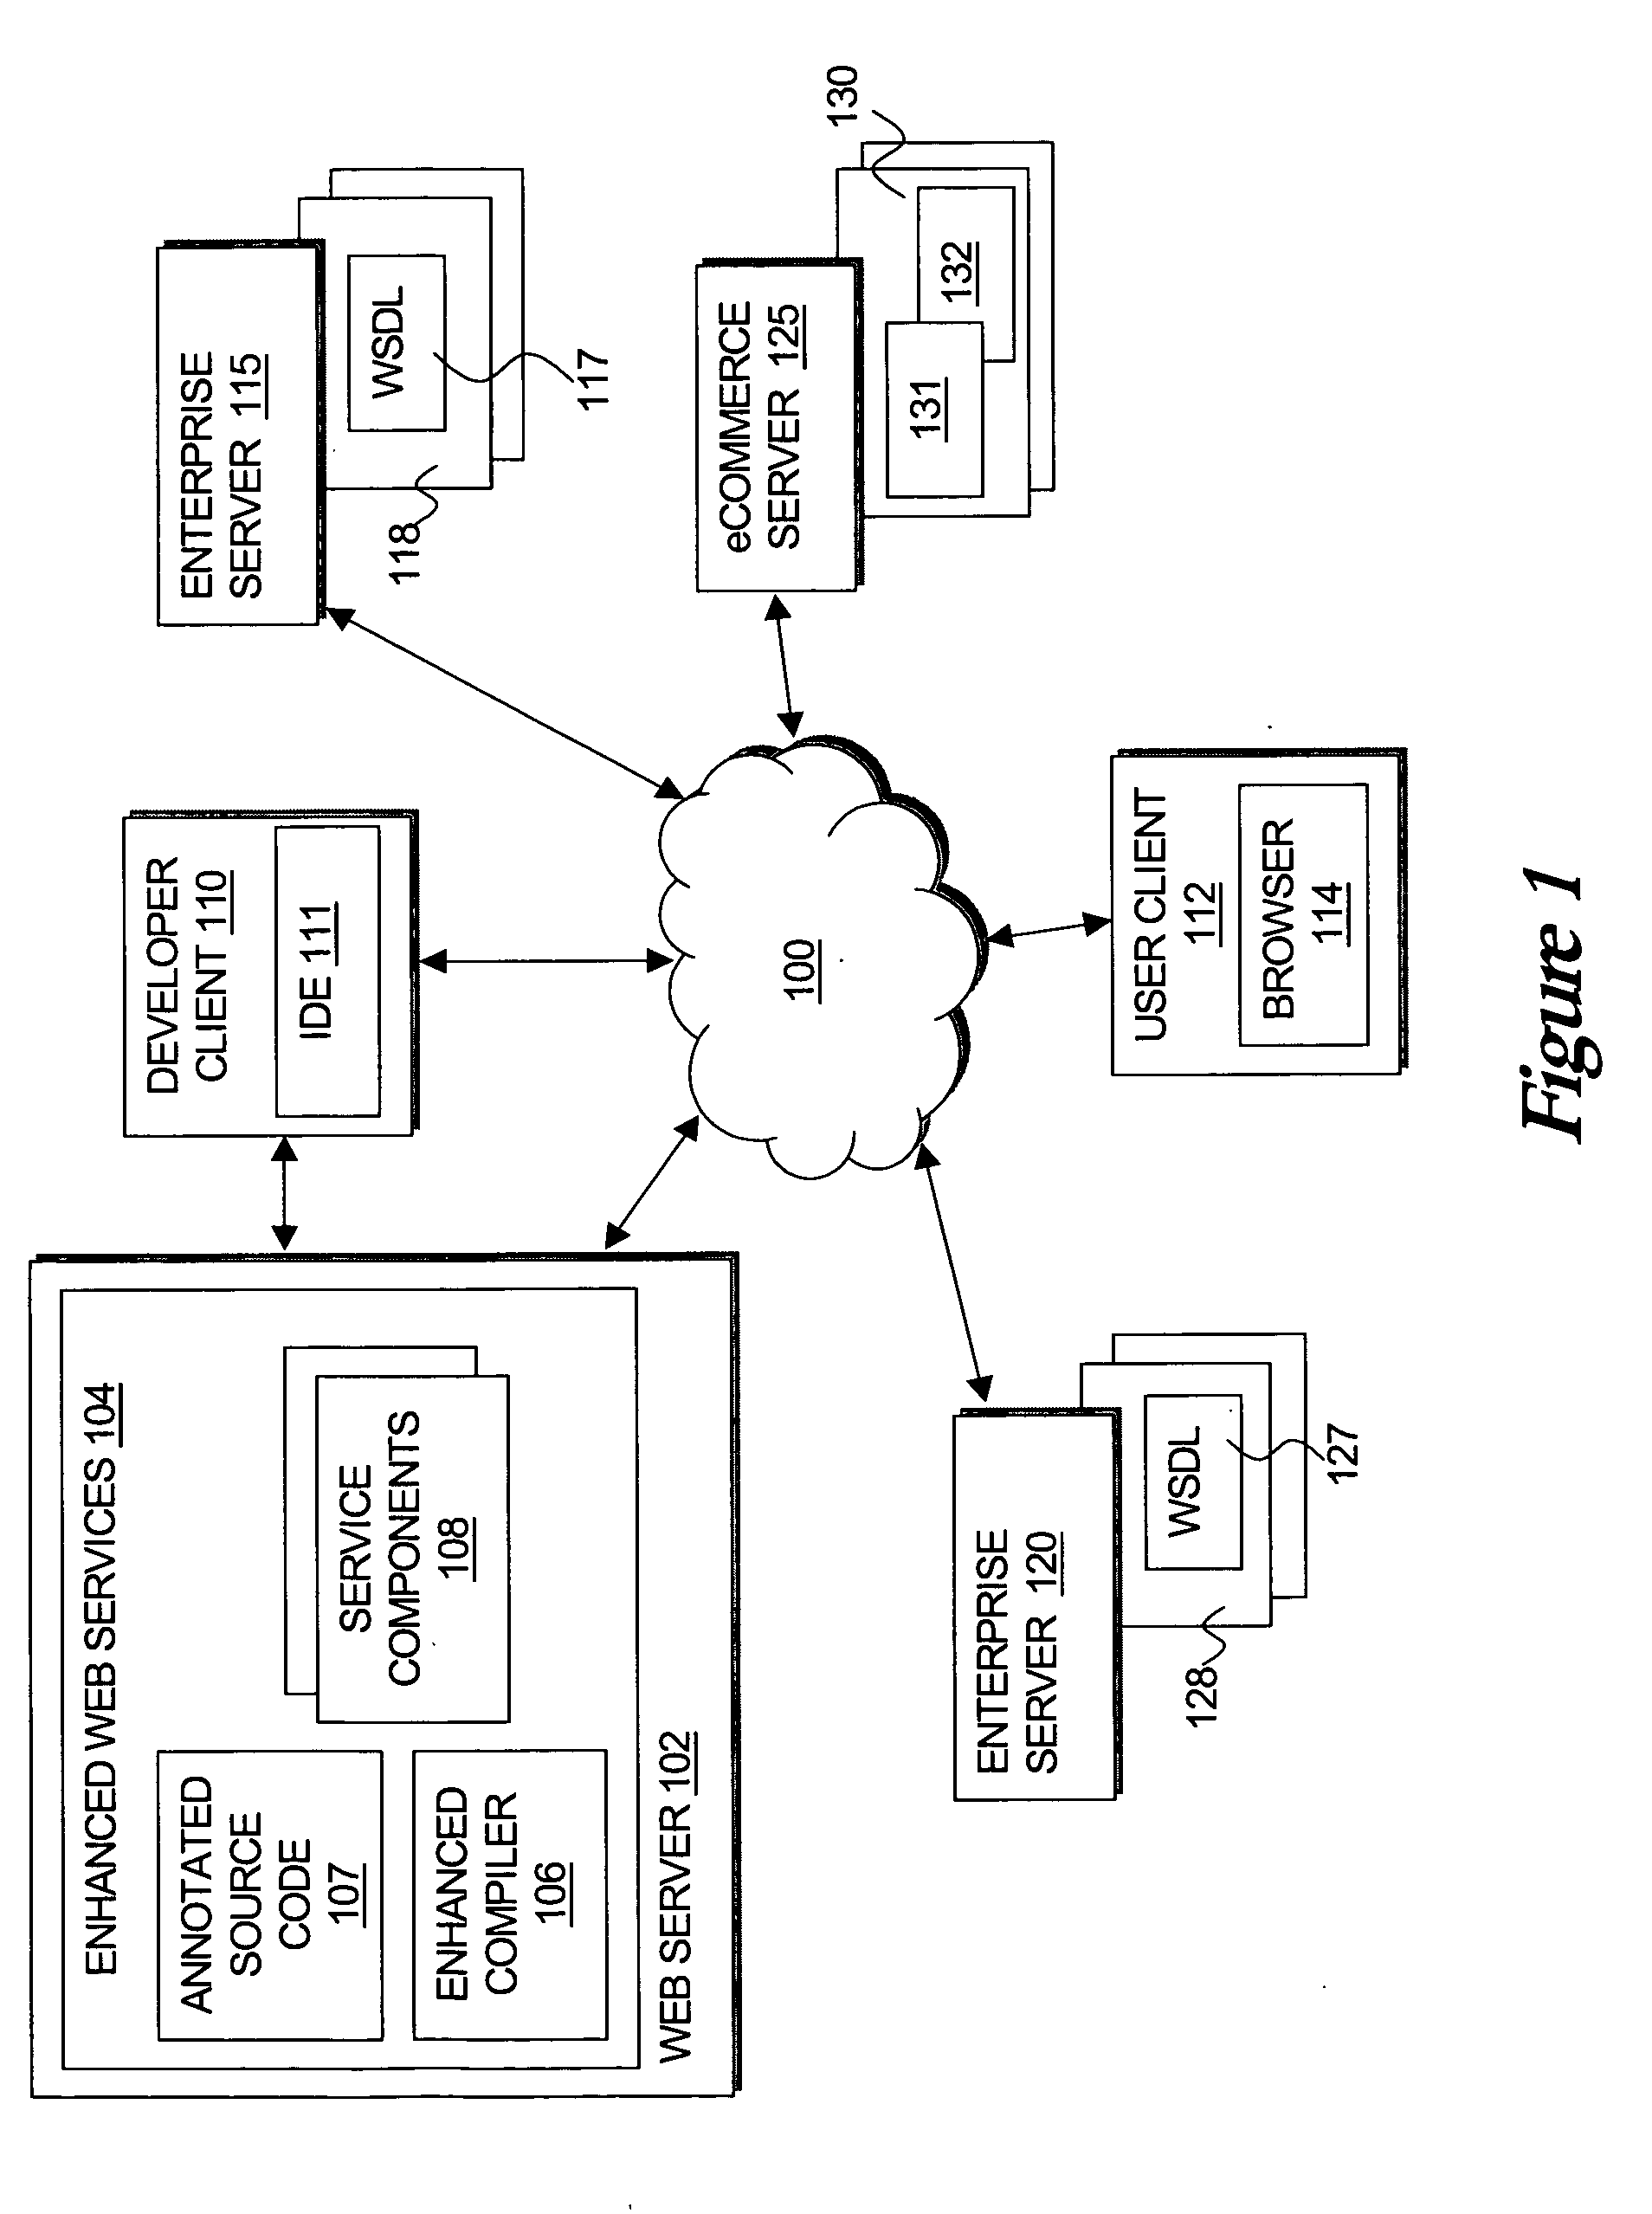 Systems and methods for creating network-based software services using source code annotations